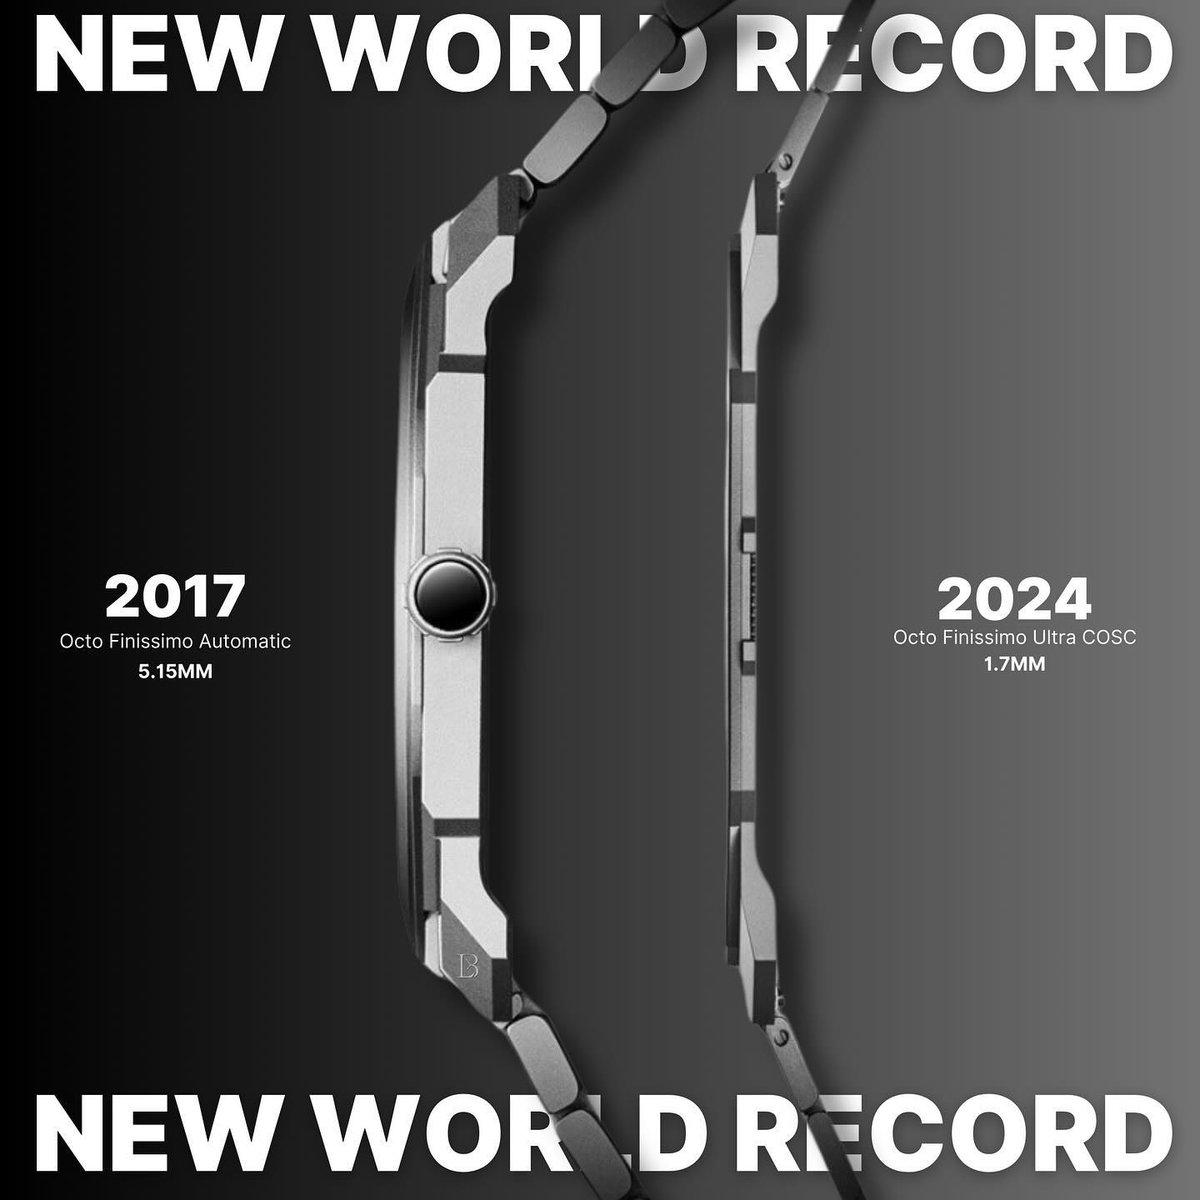 NEW WORLD RECORD 🔥 

World's thinnest watch - Octo Finissimo Ultra COSC 1.7MM

Do you think we will ever see this beaten?